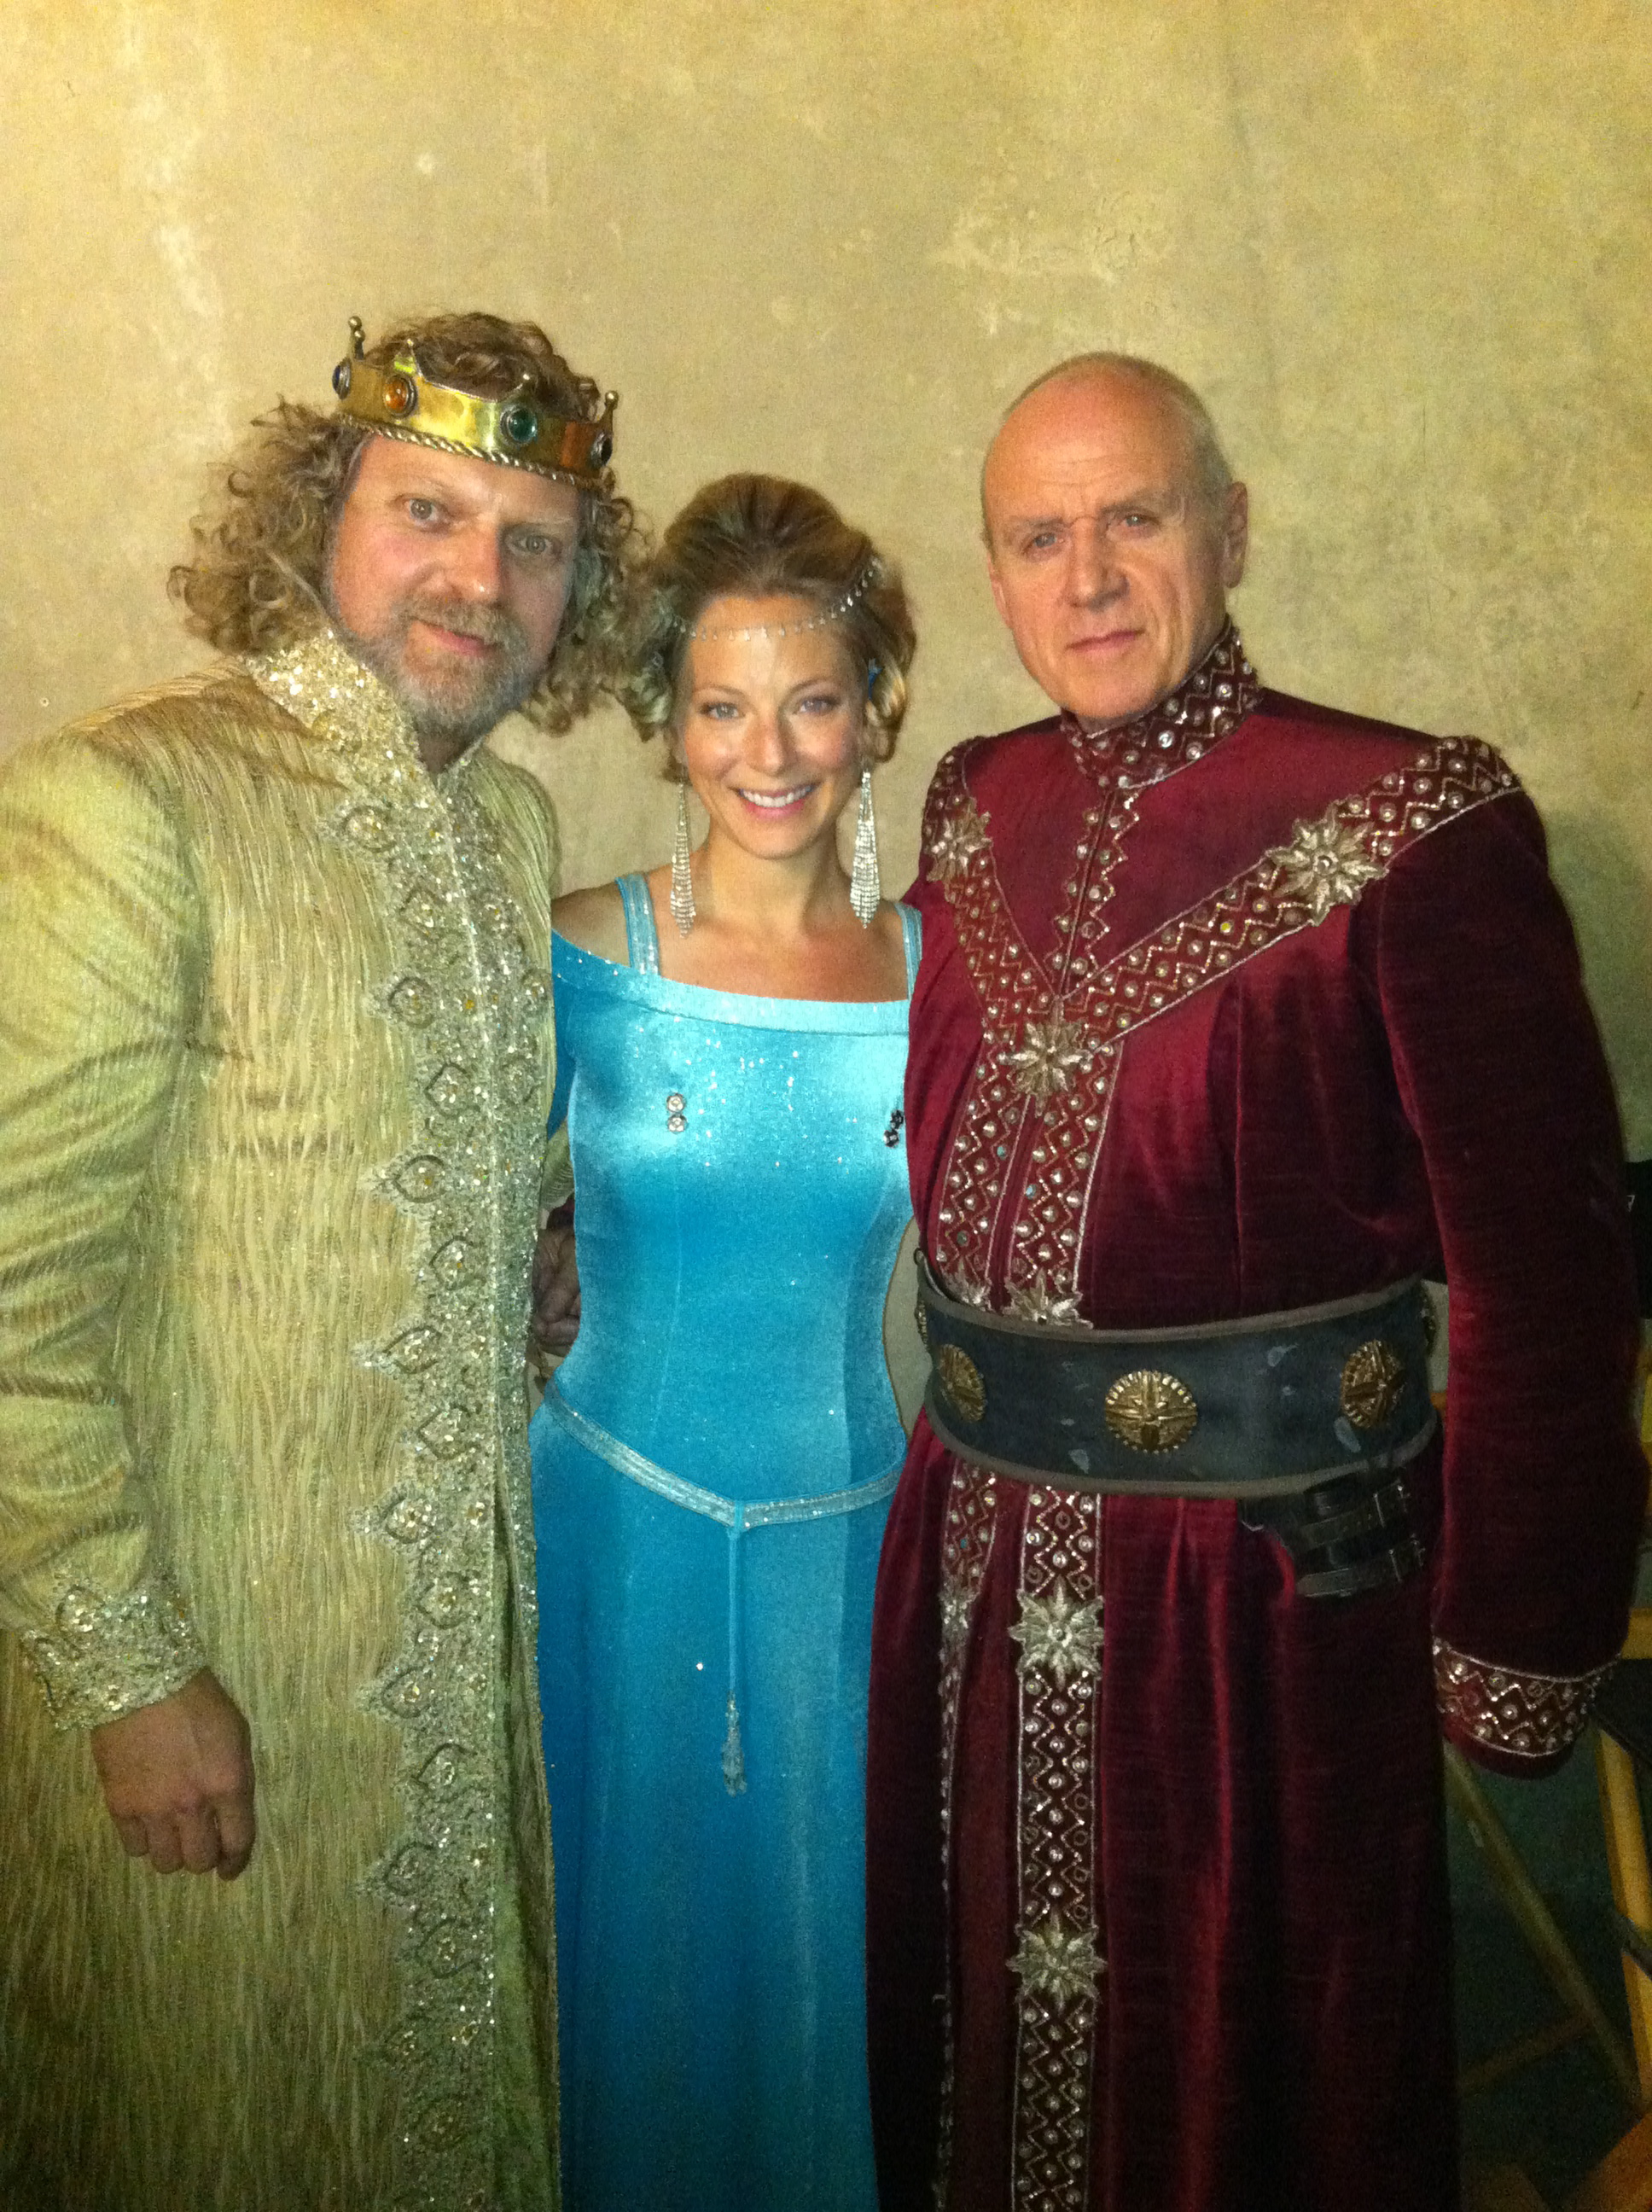 Alex as King Midas from Once Upon a Time with Anastasia Griffith, & Alan Dale